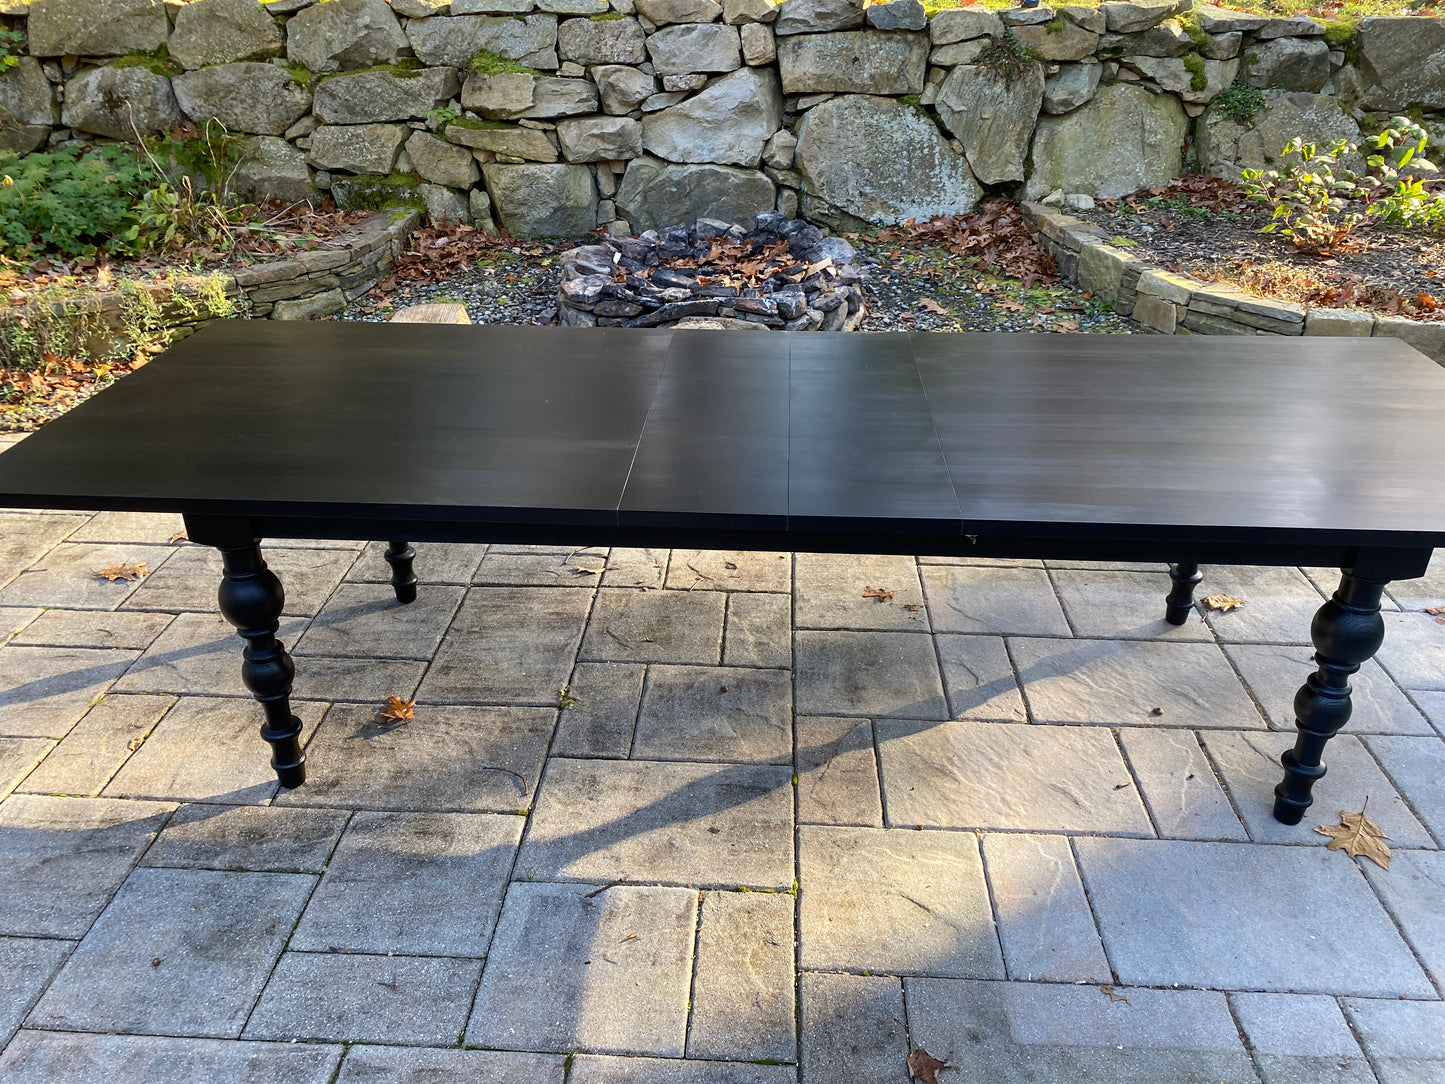 Custom Order: Laura P. Bellvale extension table